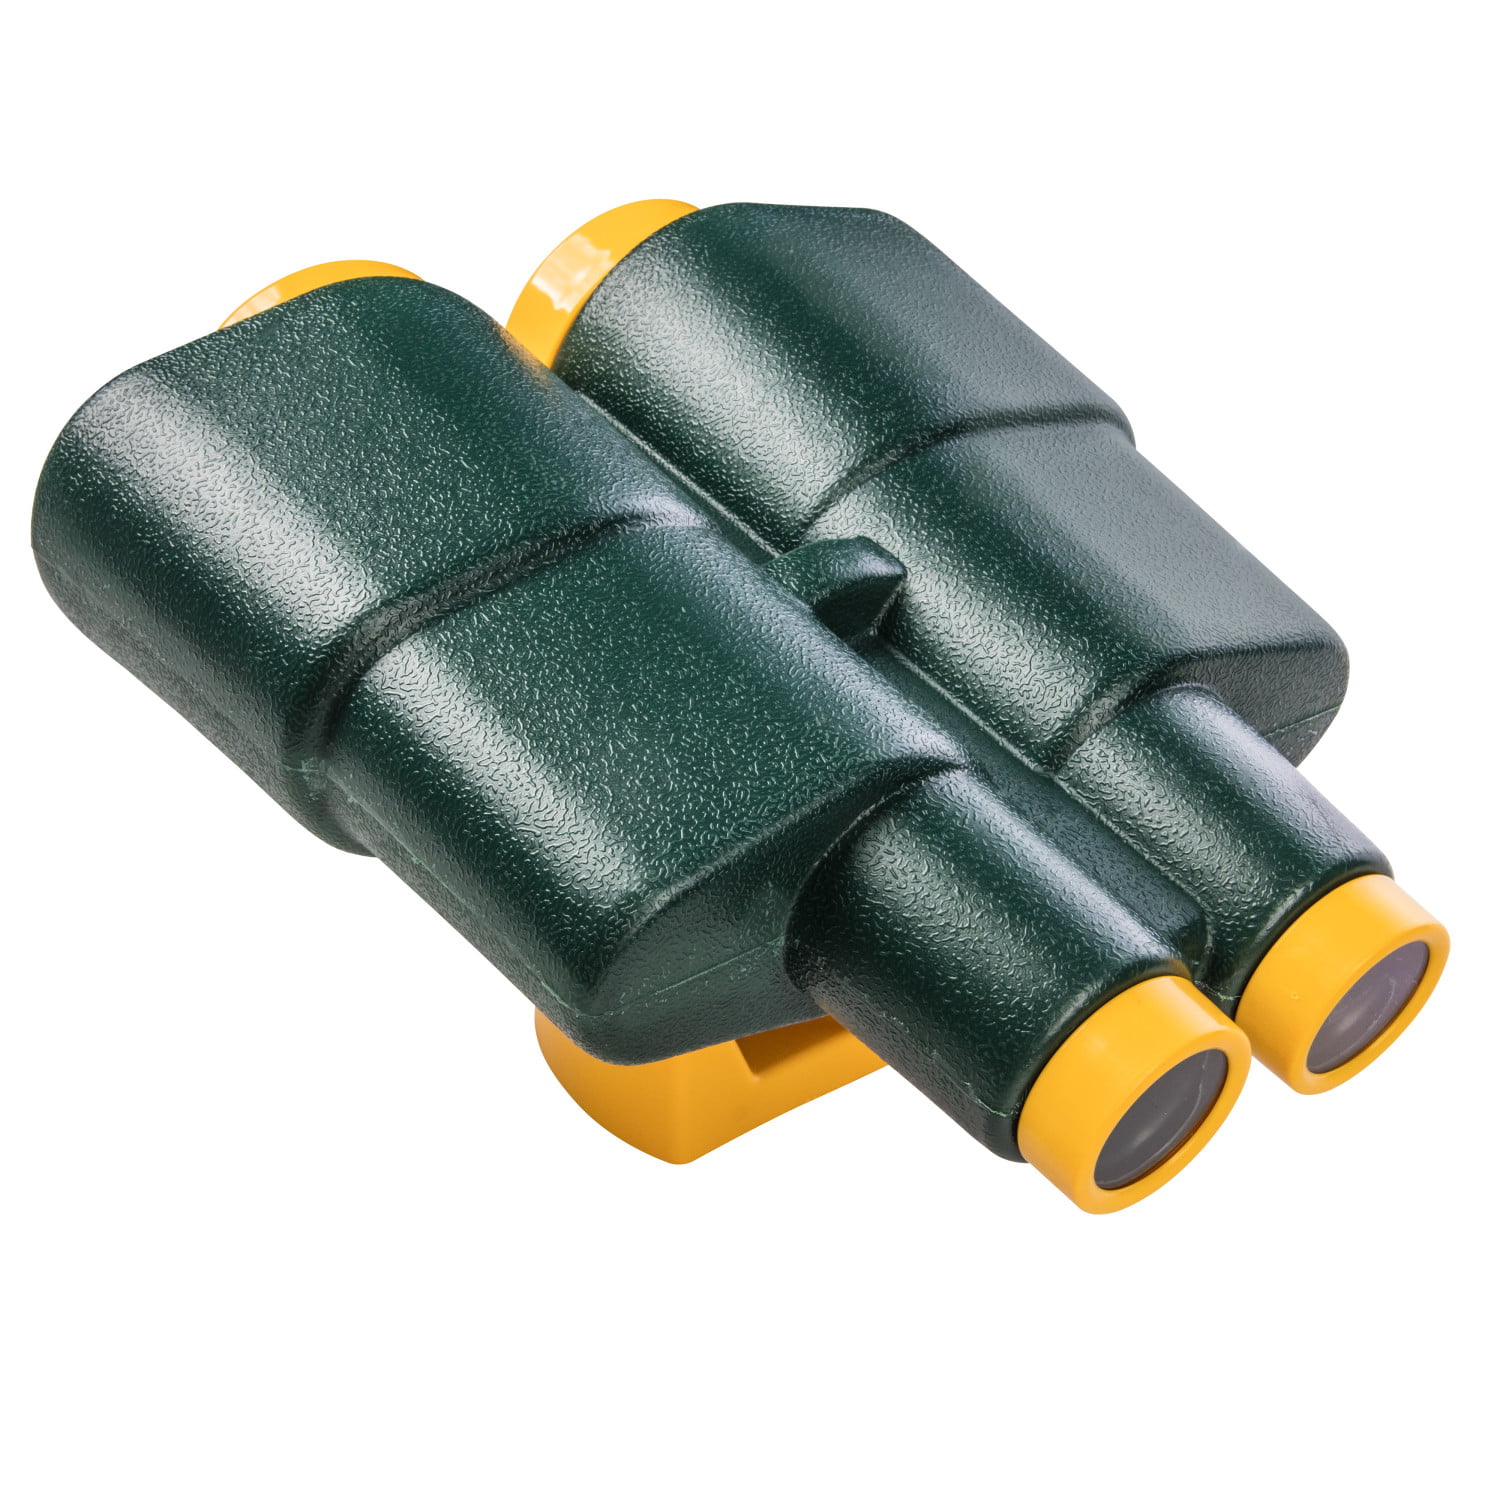 Jack and June Green and Yellow Rotating Playset Binoculars Compatible with Most Playsets 